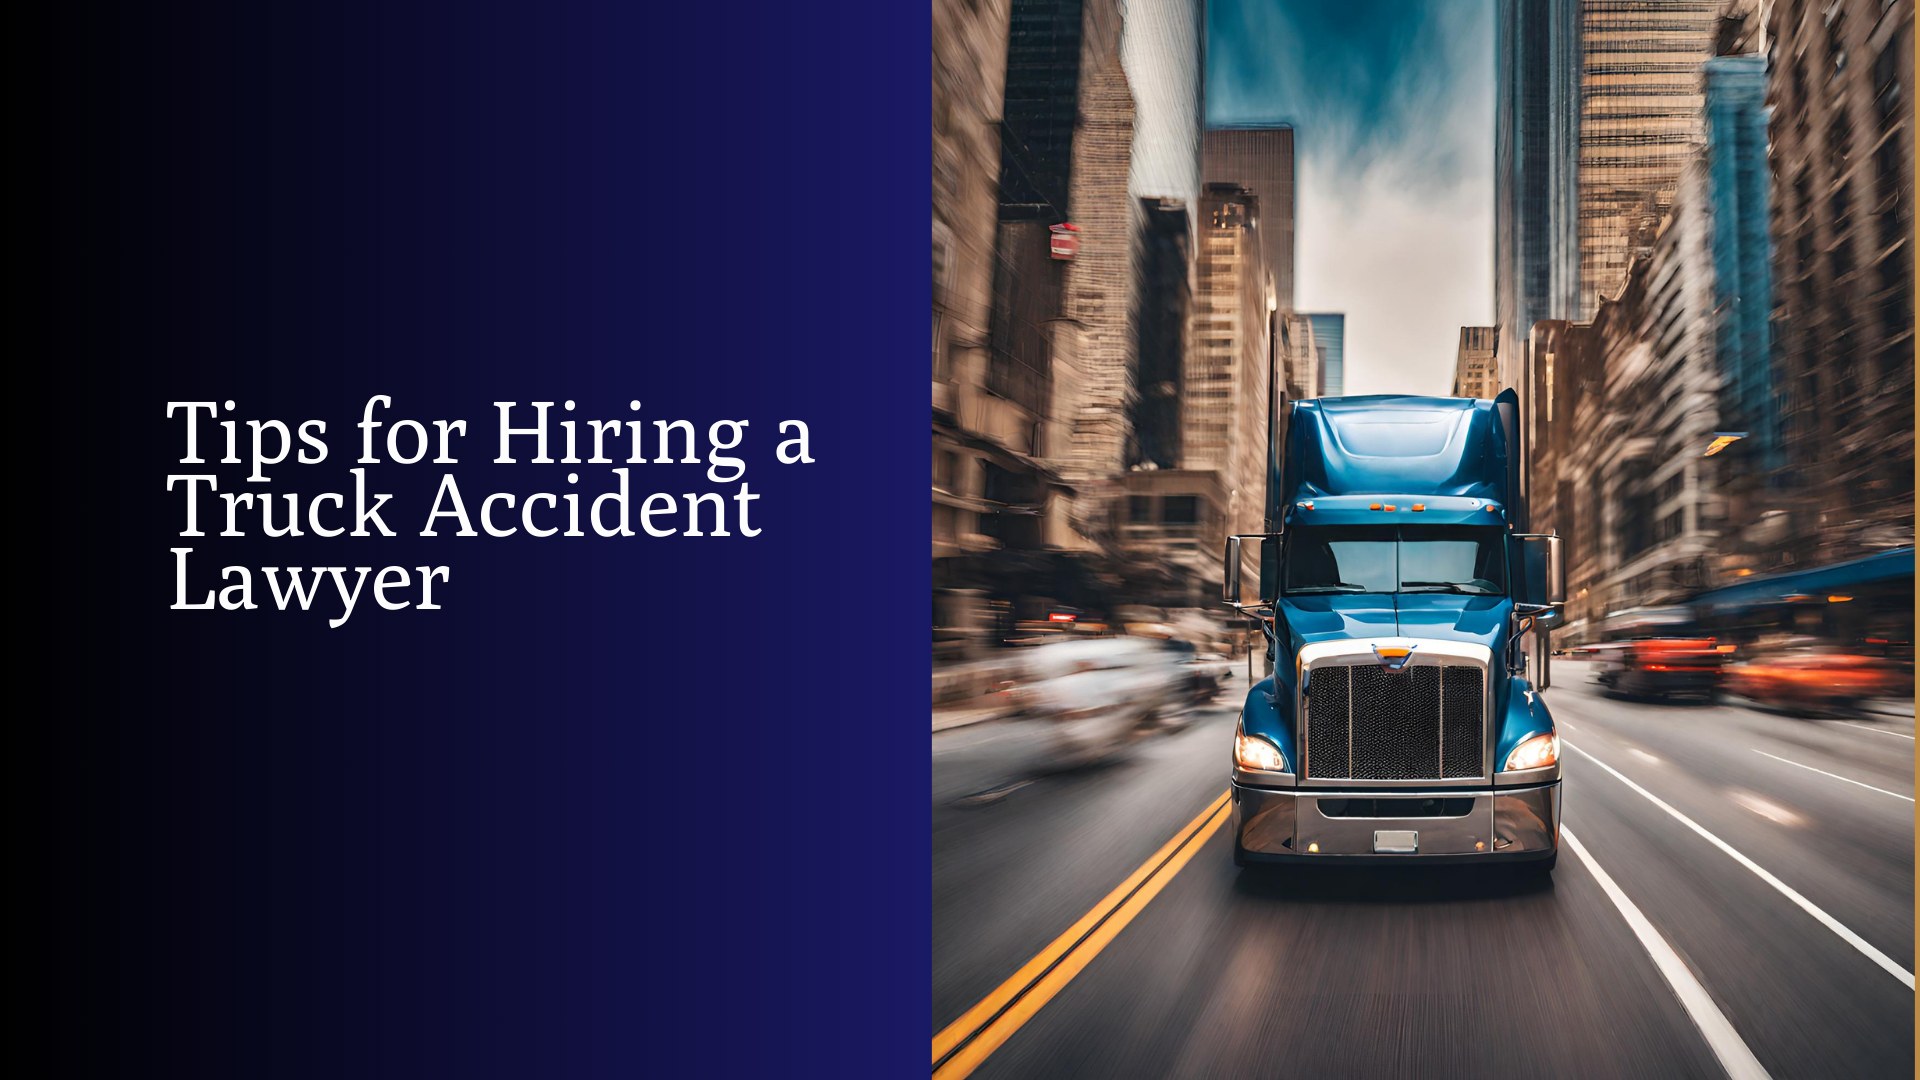 Tips-for-Hiring-a-Truck-Accident-Lawyer